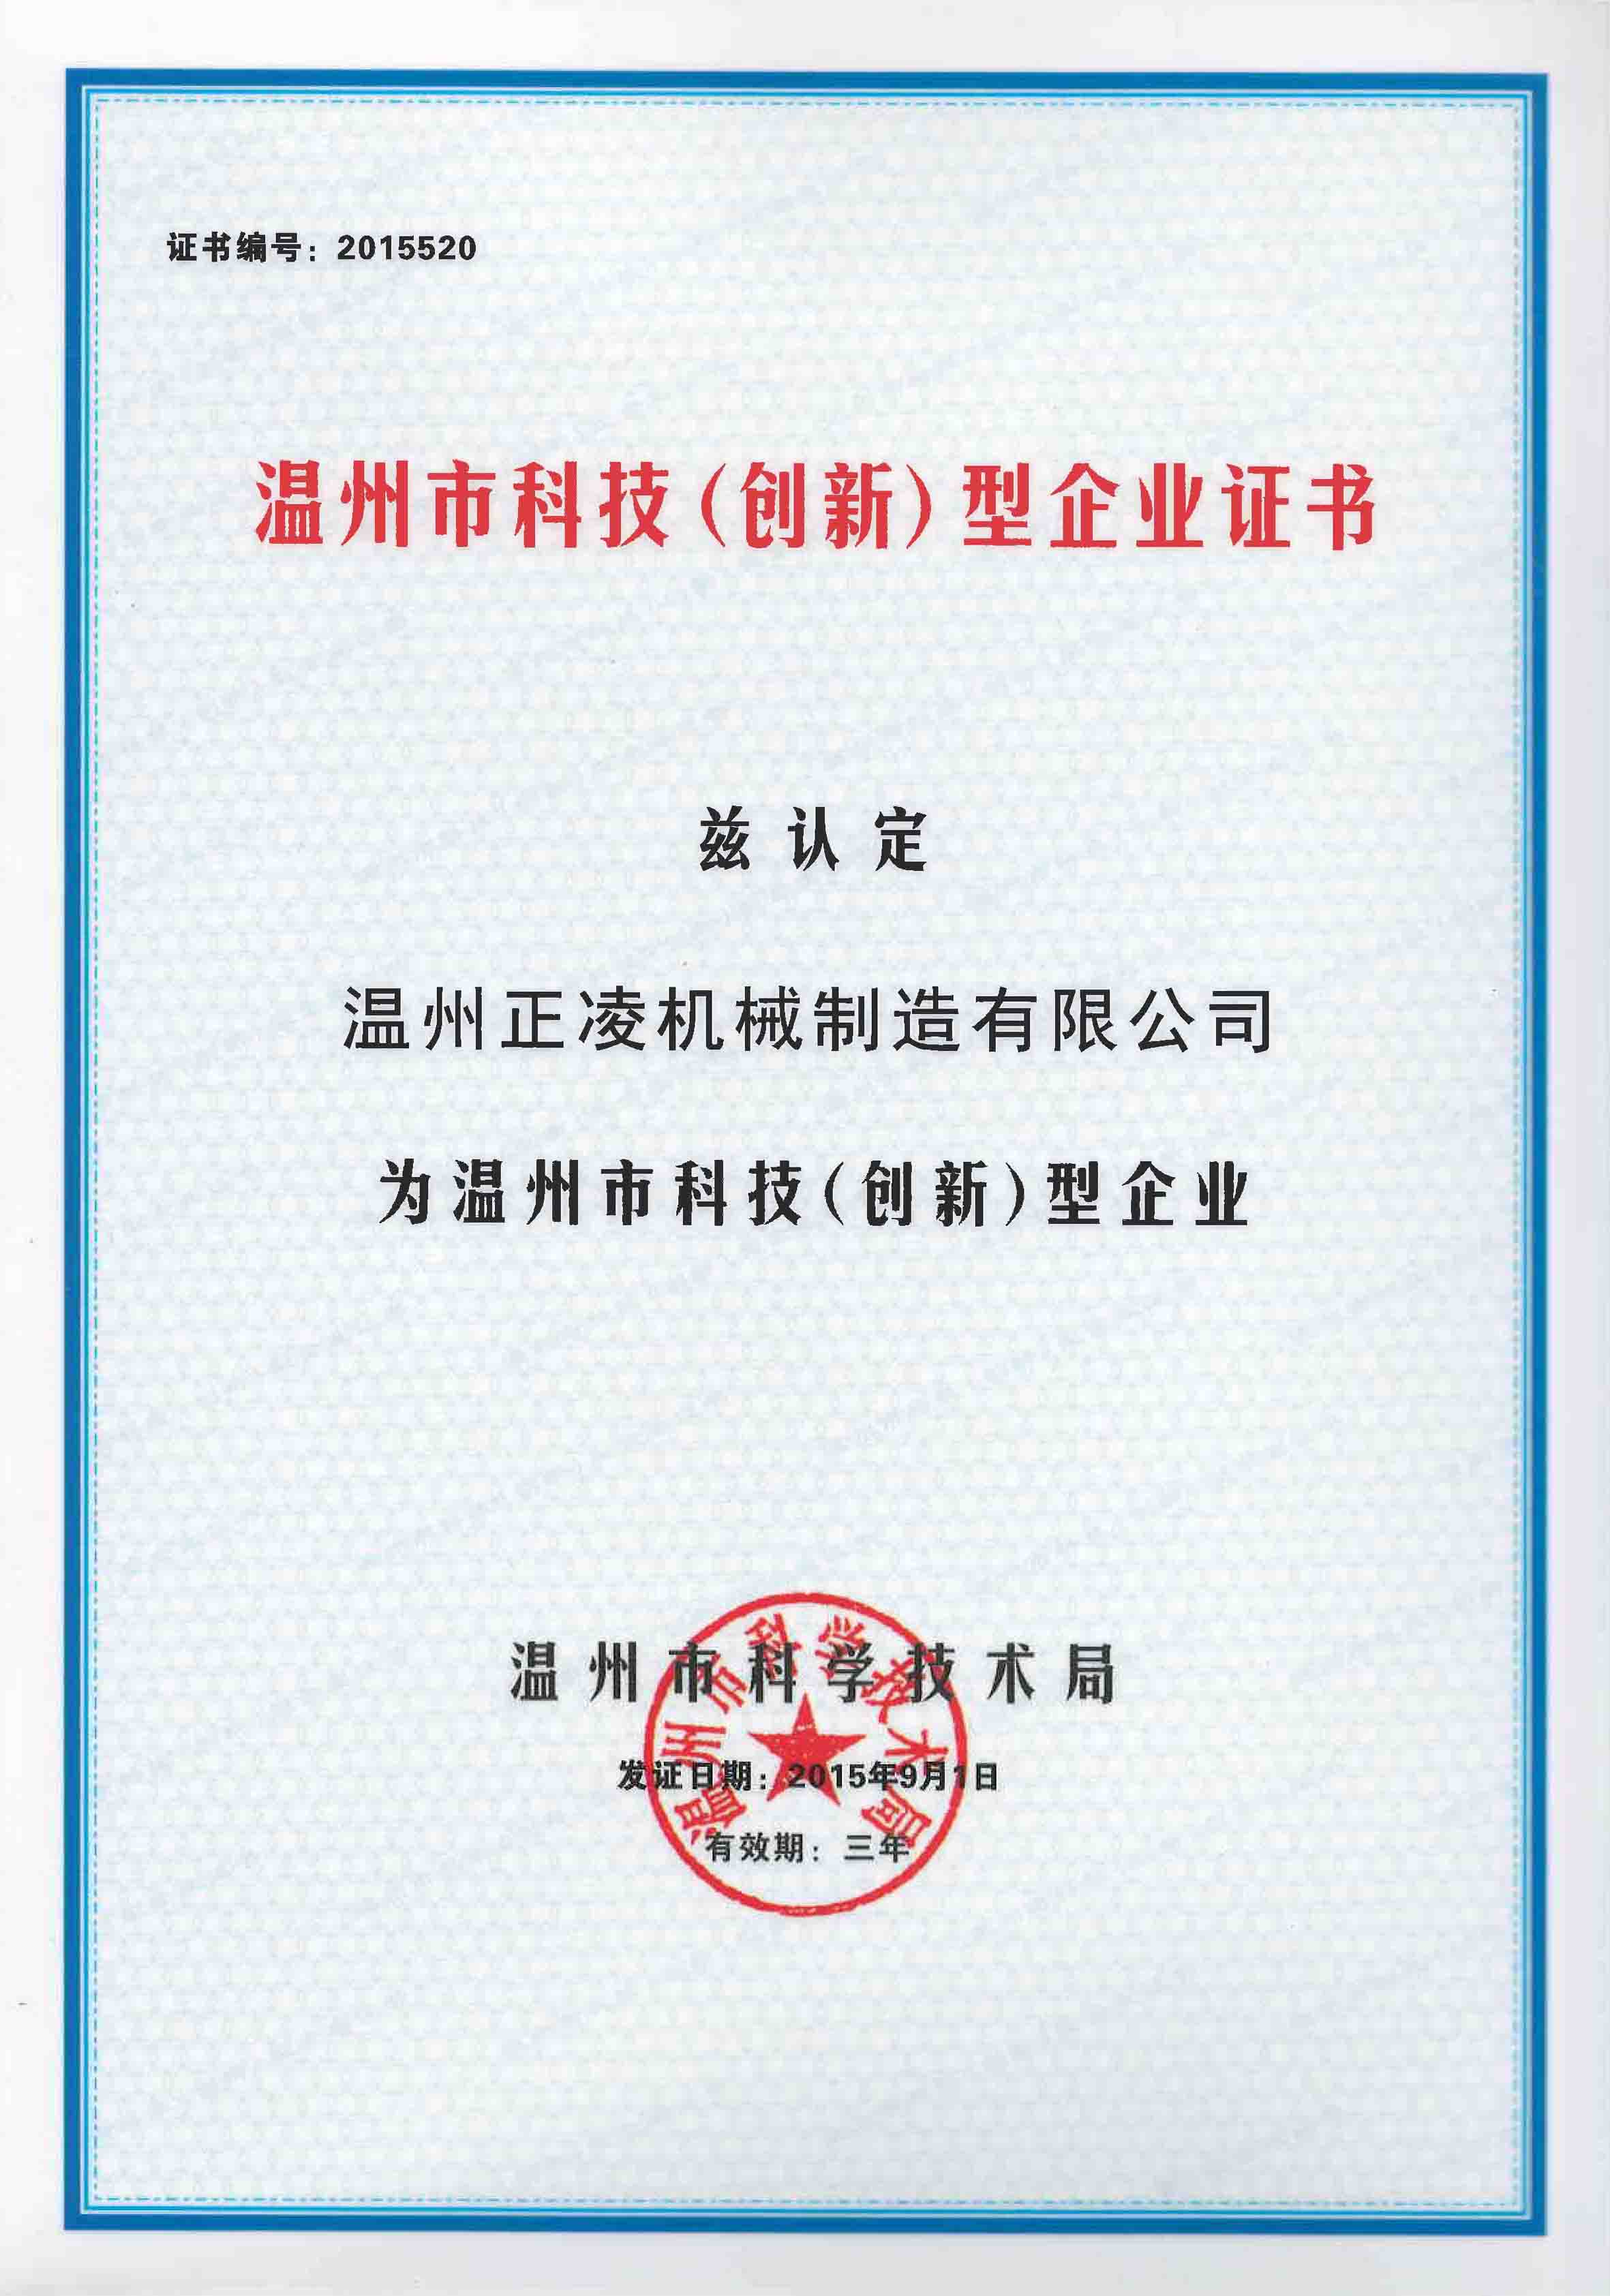 Science and Technology (Innovative) Enterprise Certificate